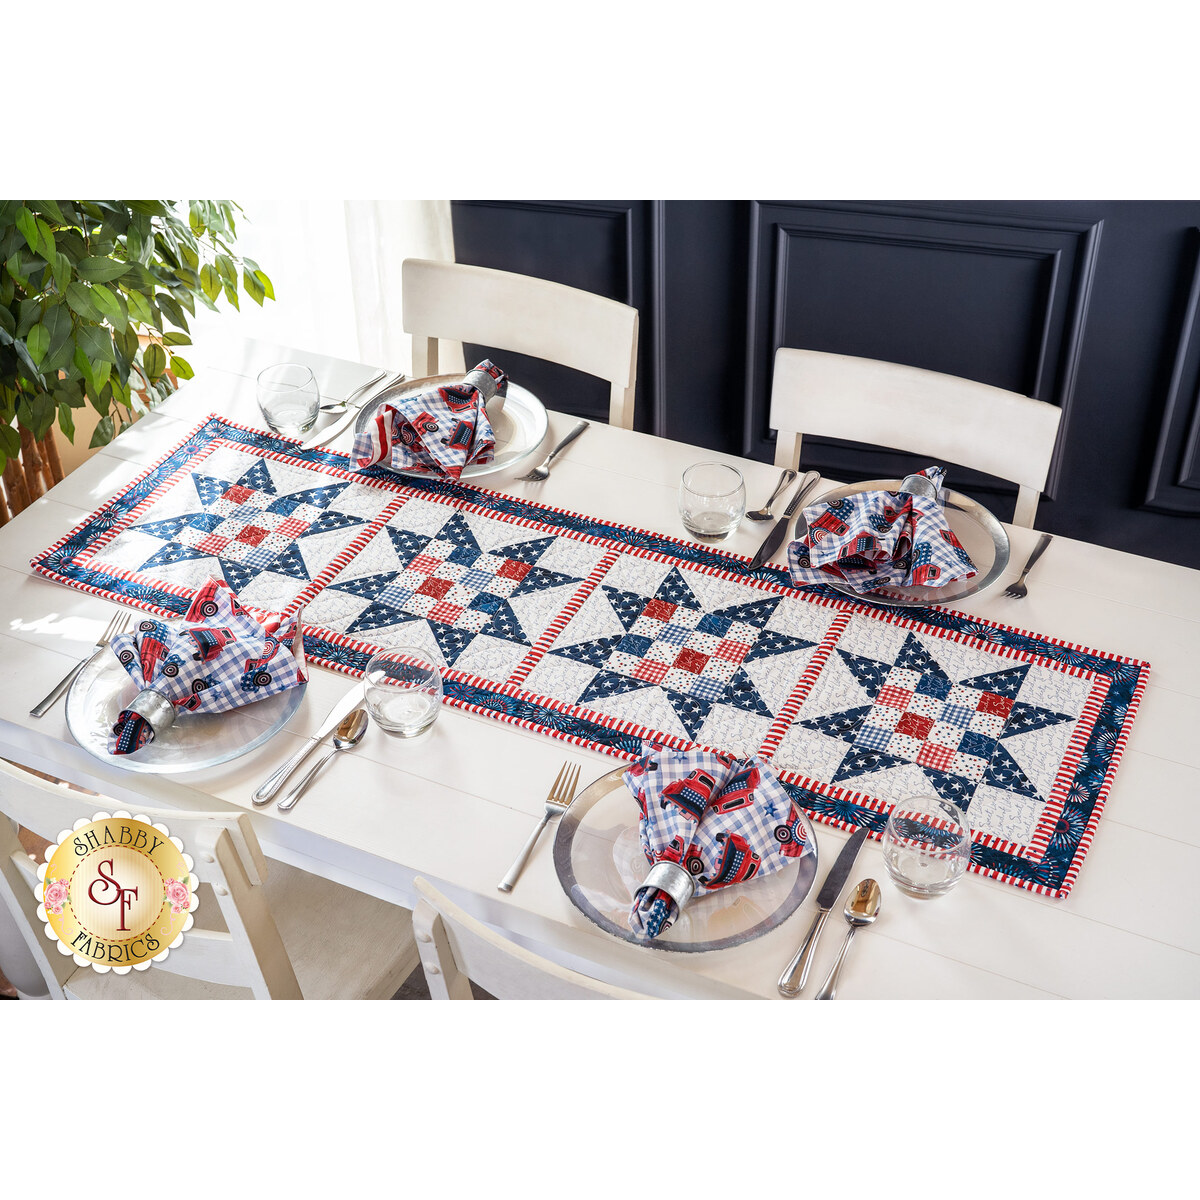 Sawtooth 16-Patch Table Runner Kit I Love That | Shabby Fabrics - Land